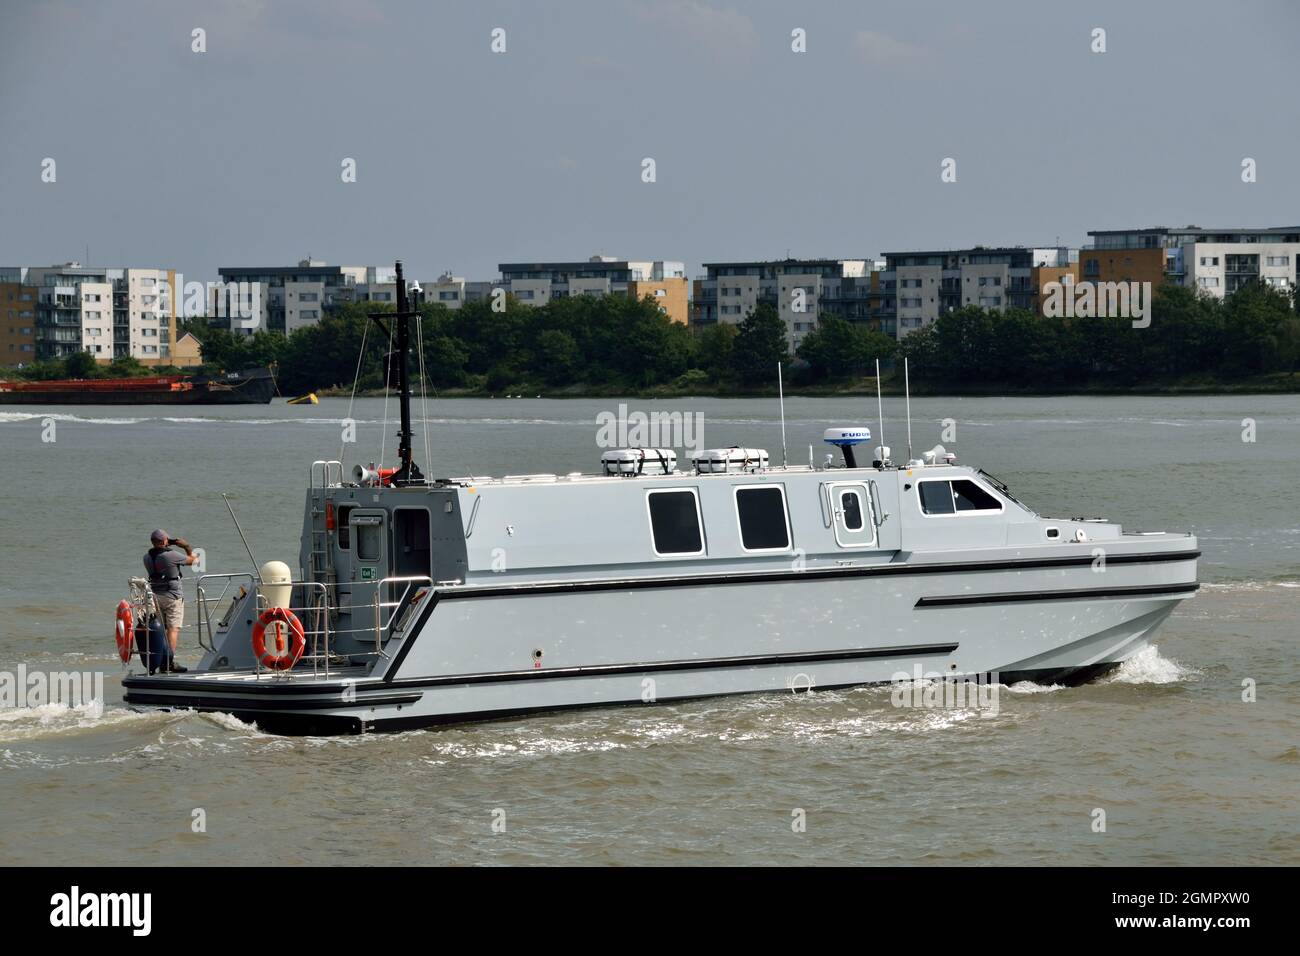 Royal Navy Officer Training Boat OTB-08 leaving London's Royal Docks after taking part in DSEI 2021 event Stock Photo